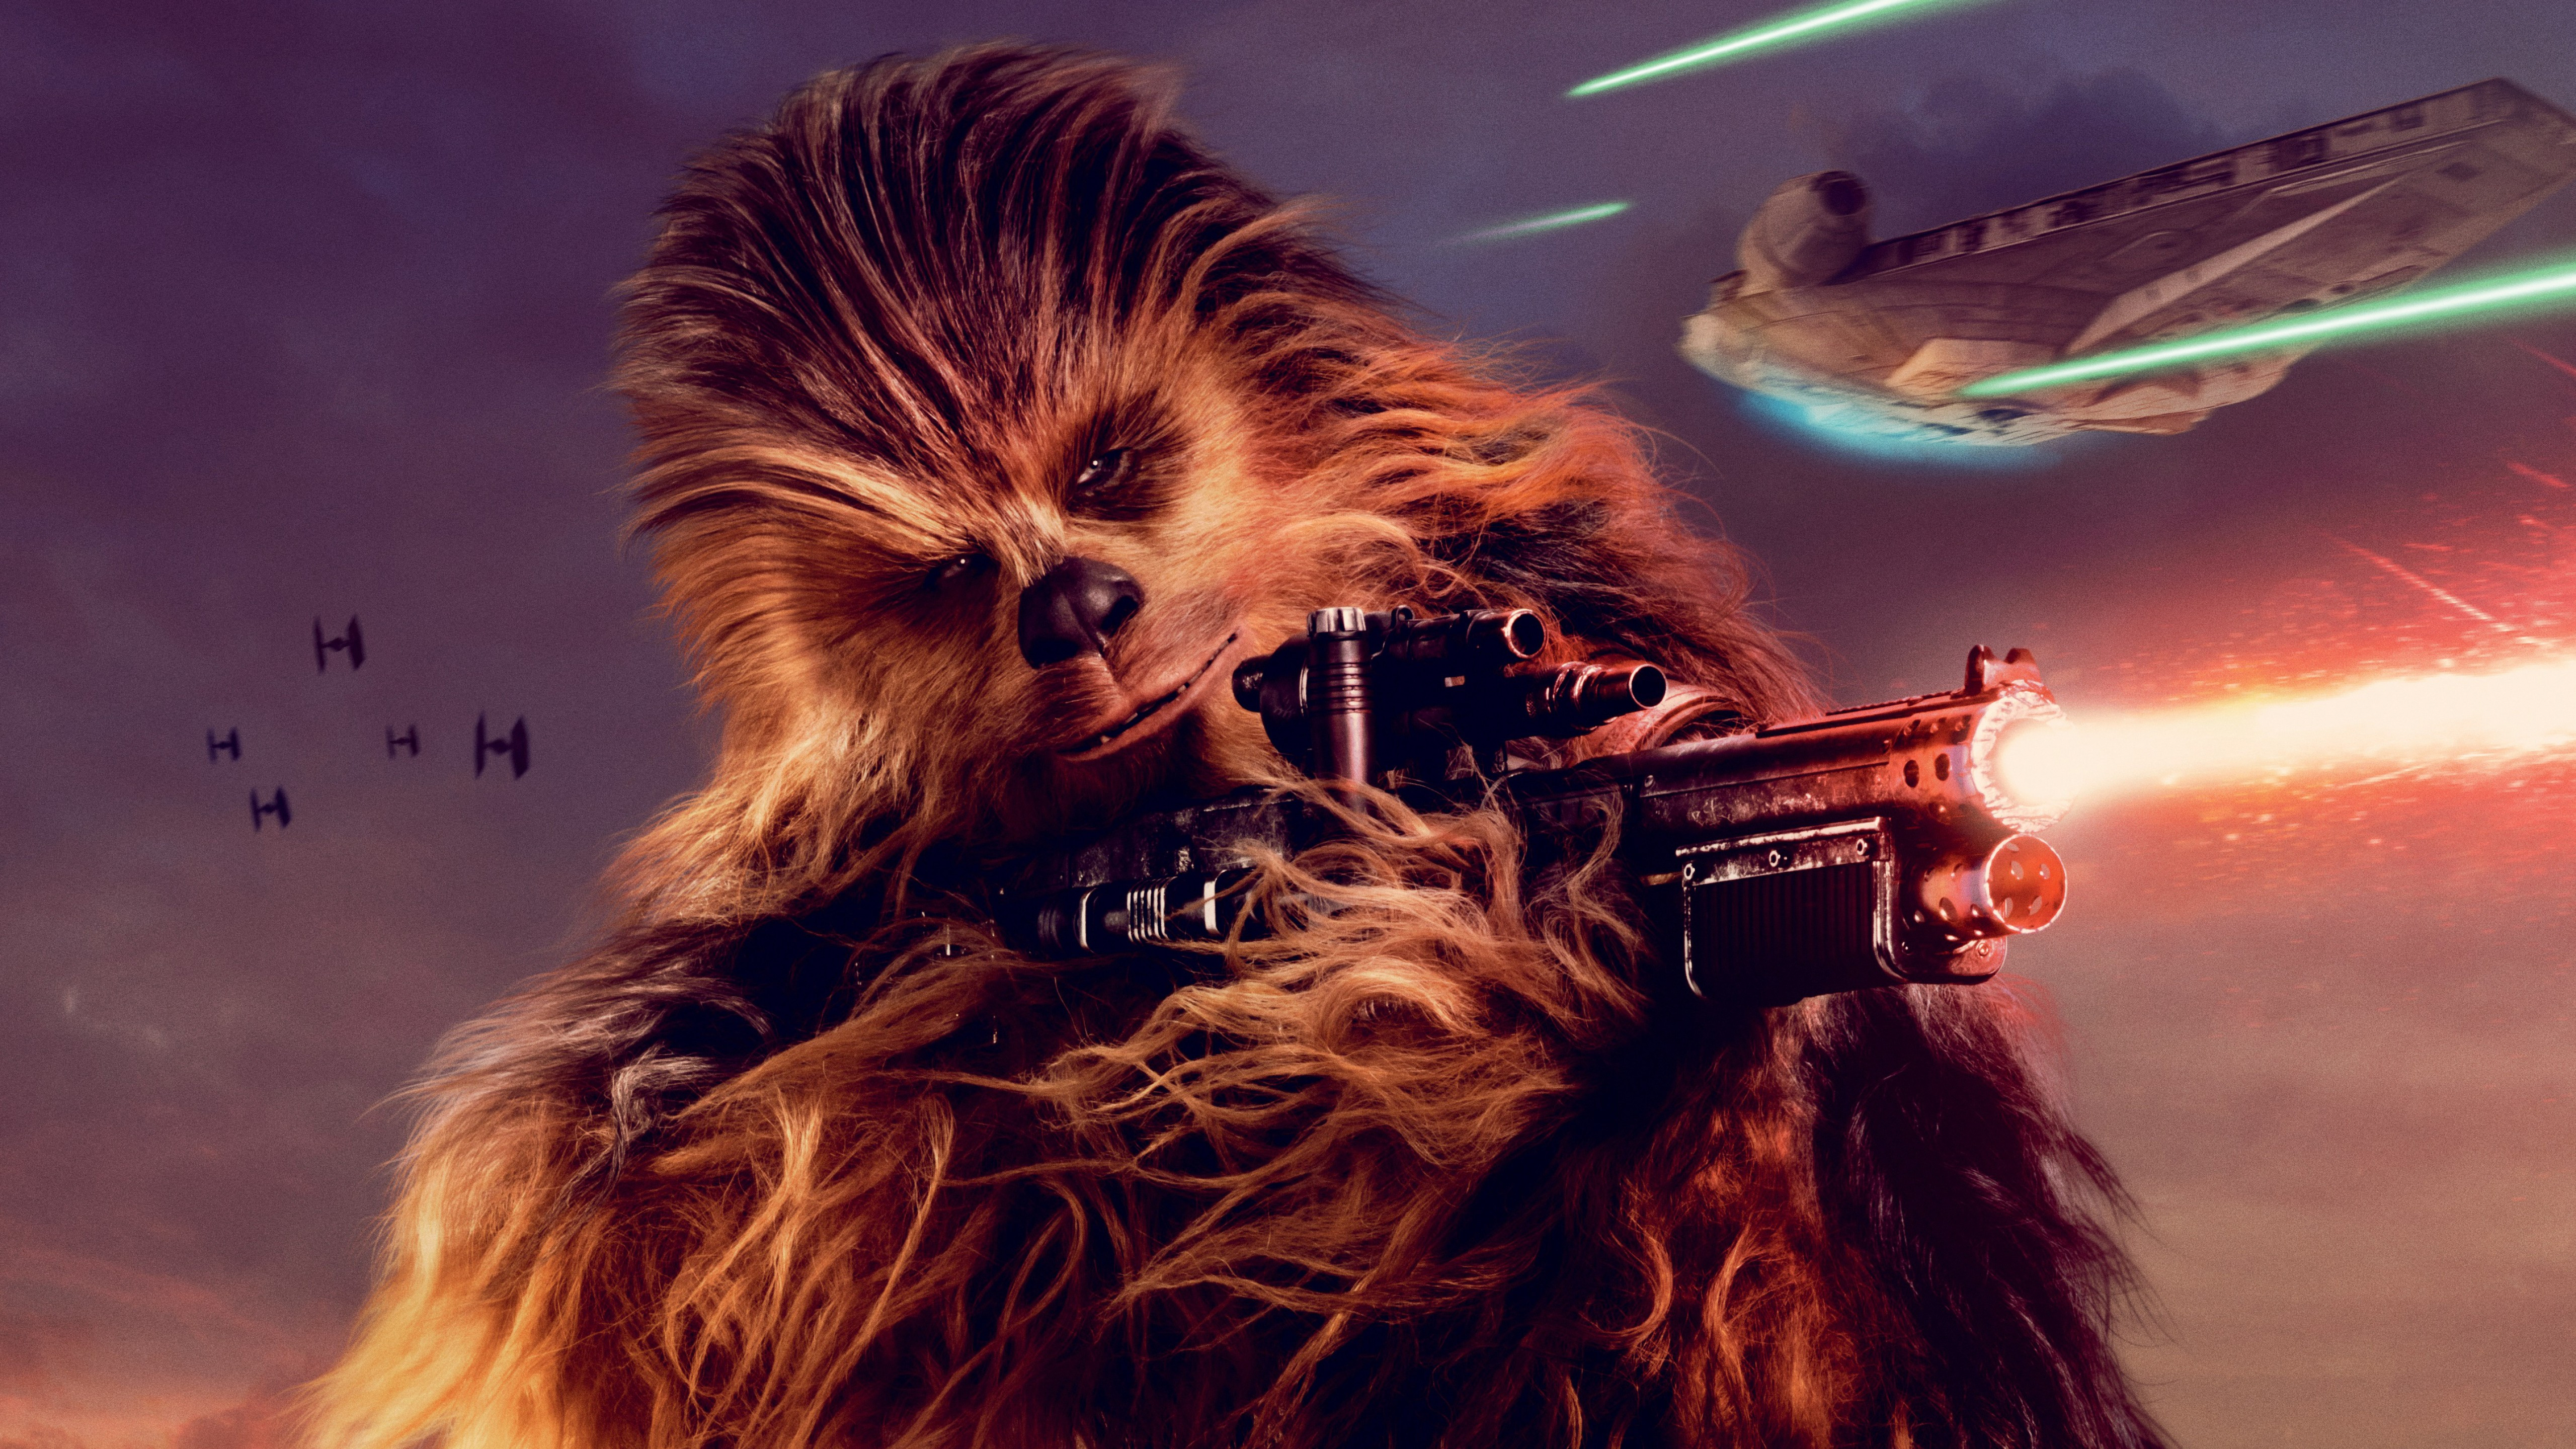 Wallpaper Solo: A Star Wars Story, Chewbacca, 4K, 5K, Movies #18449